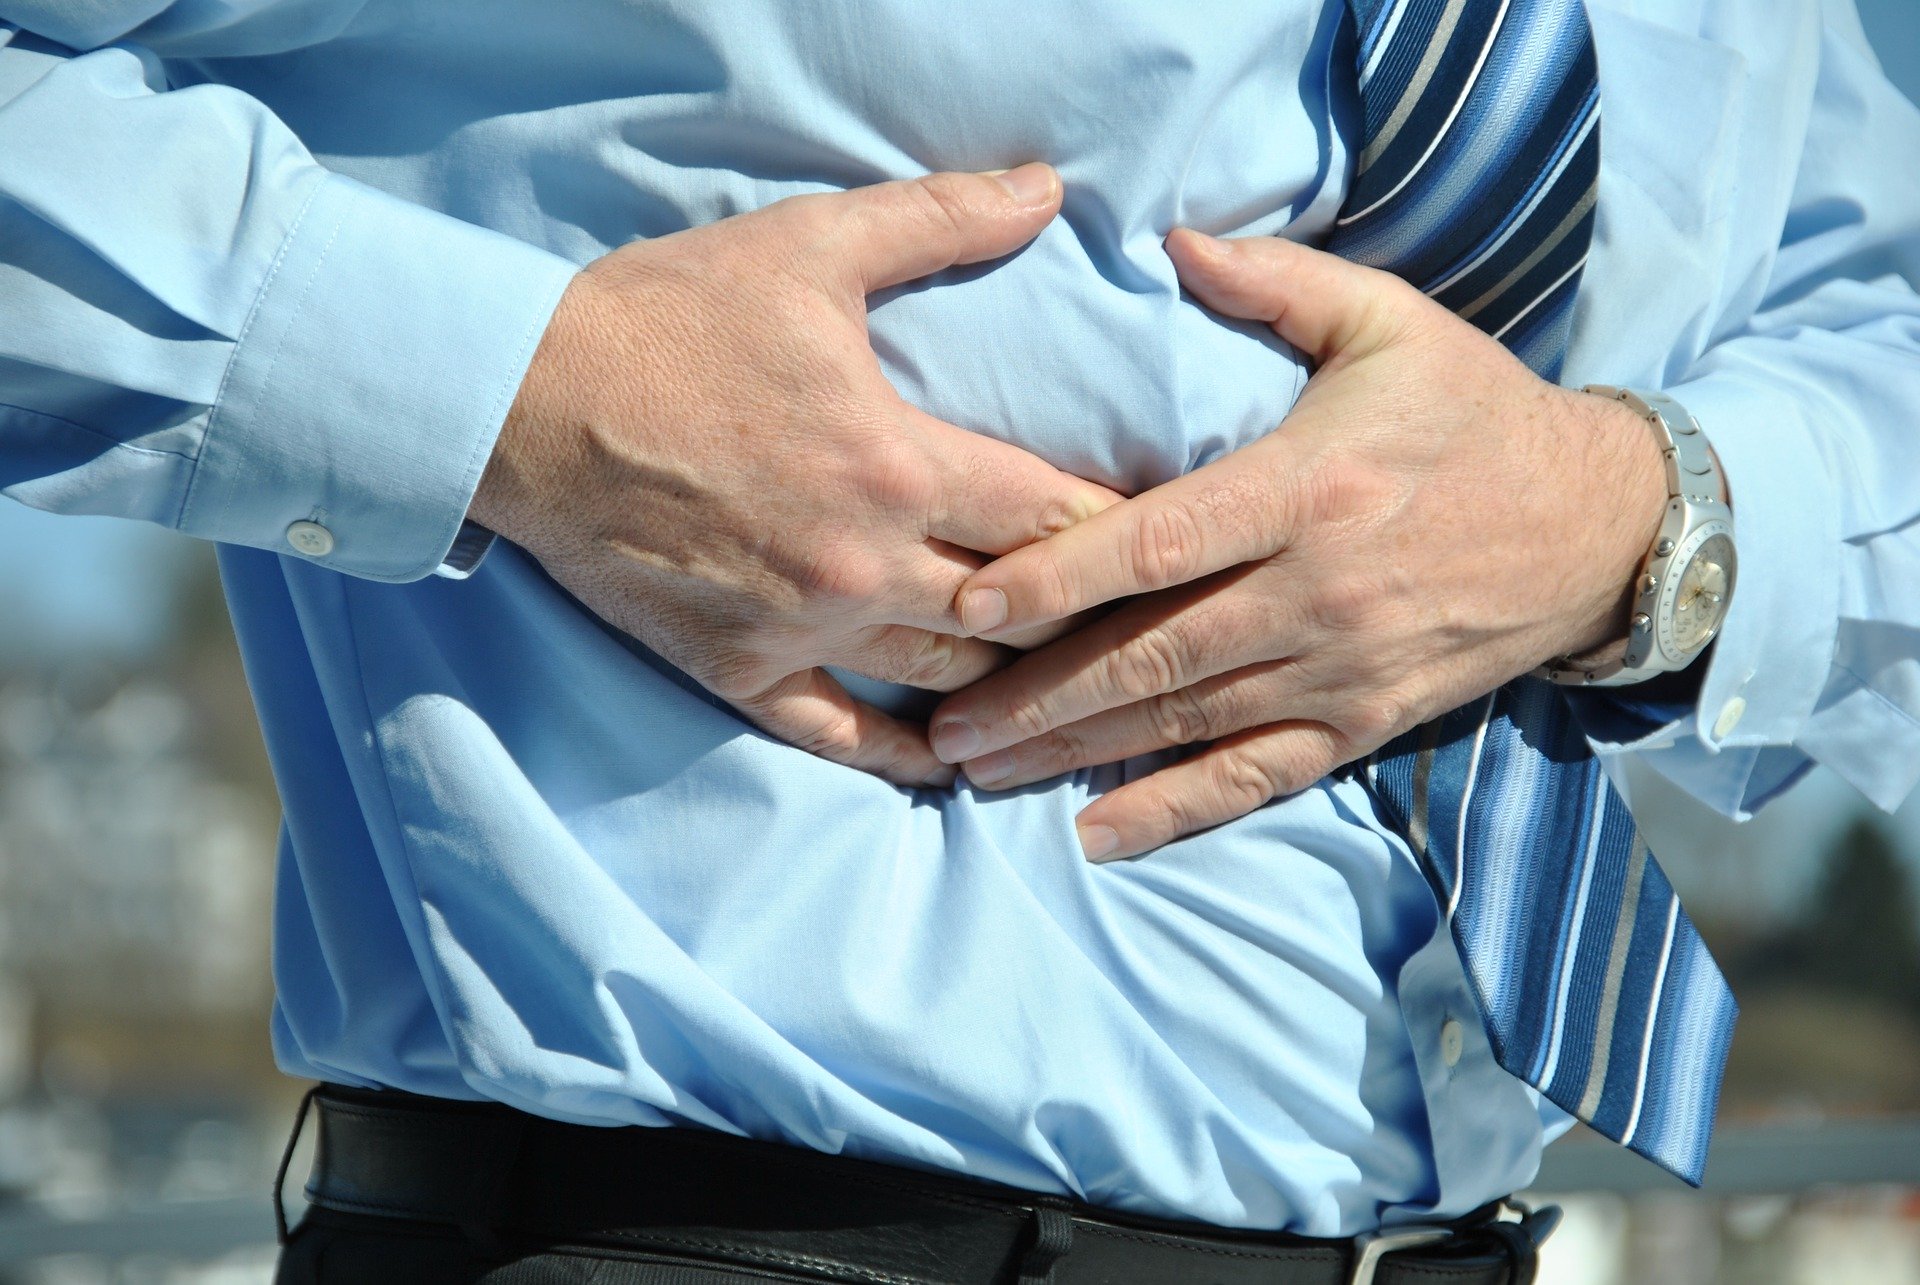 can bad posture cause abdominal pain